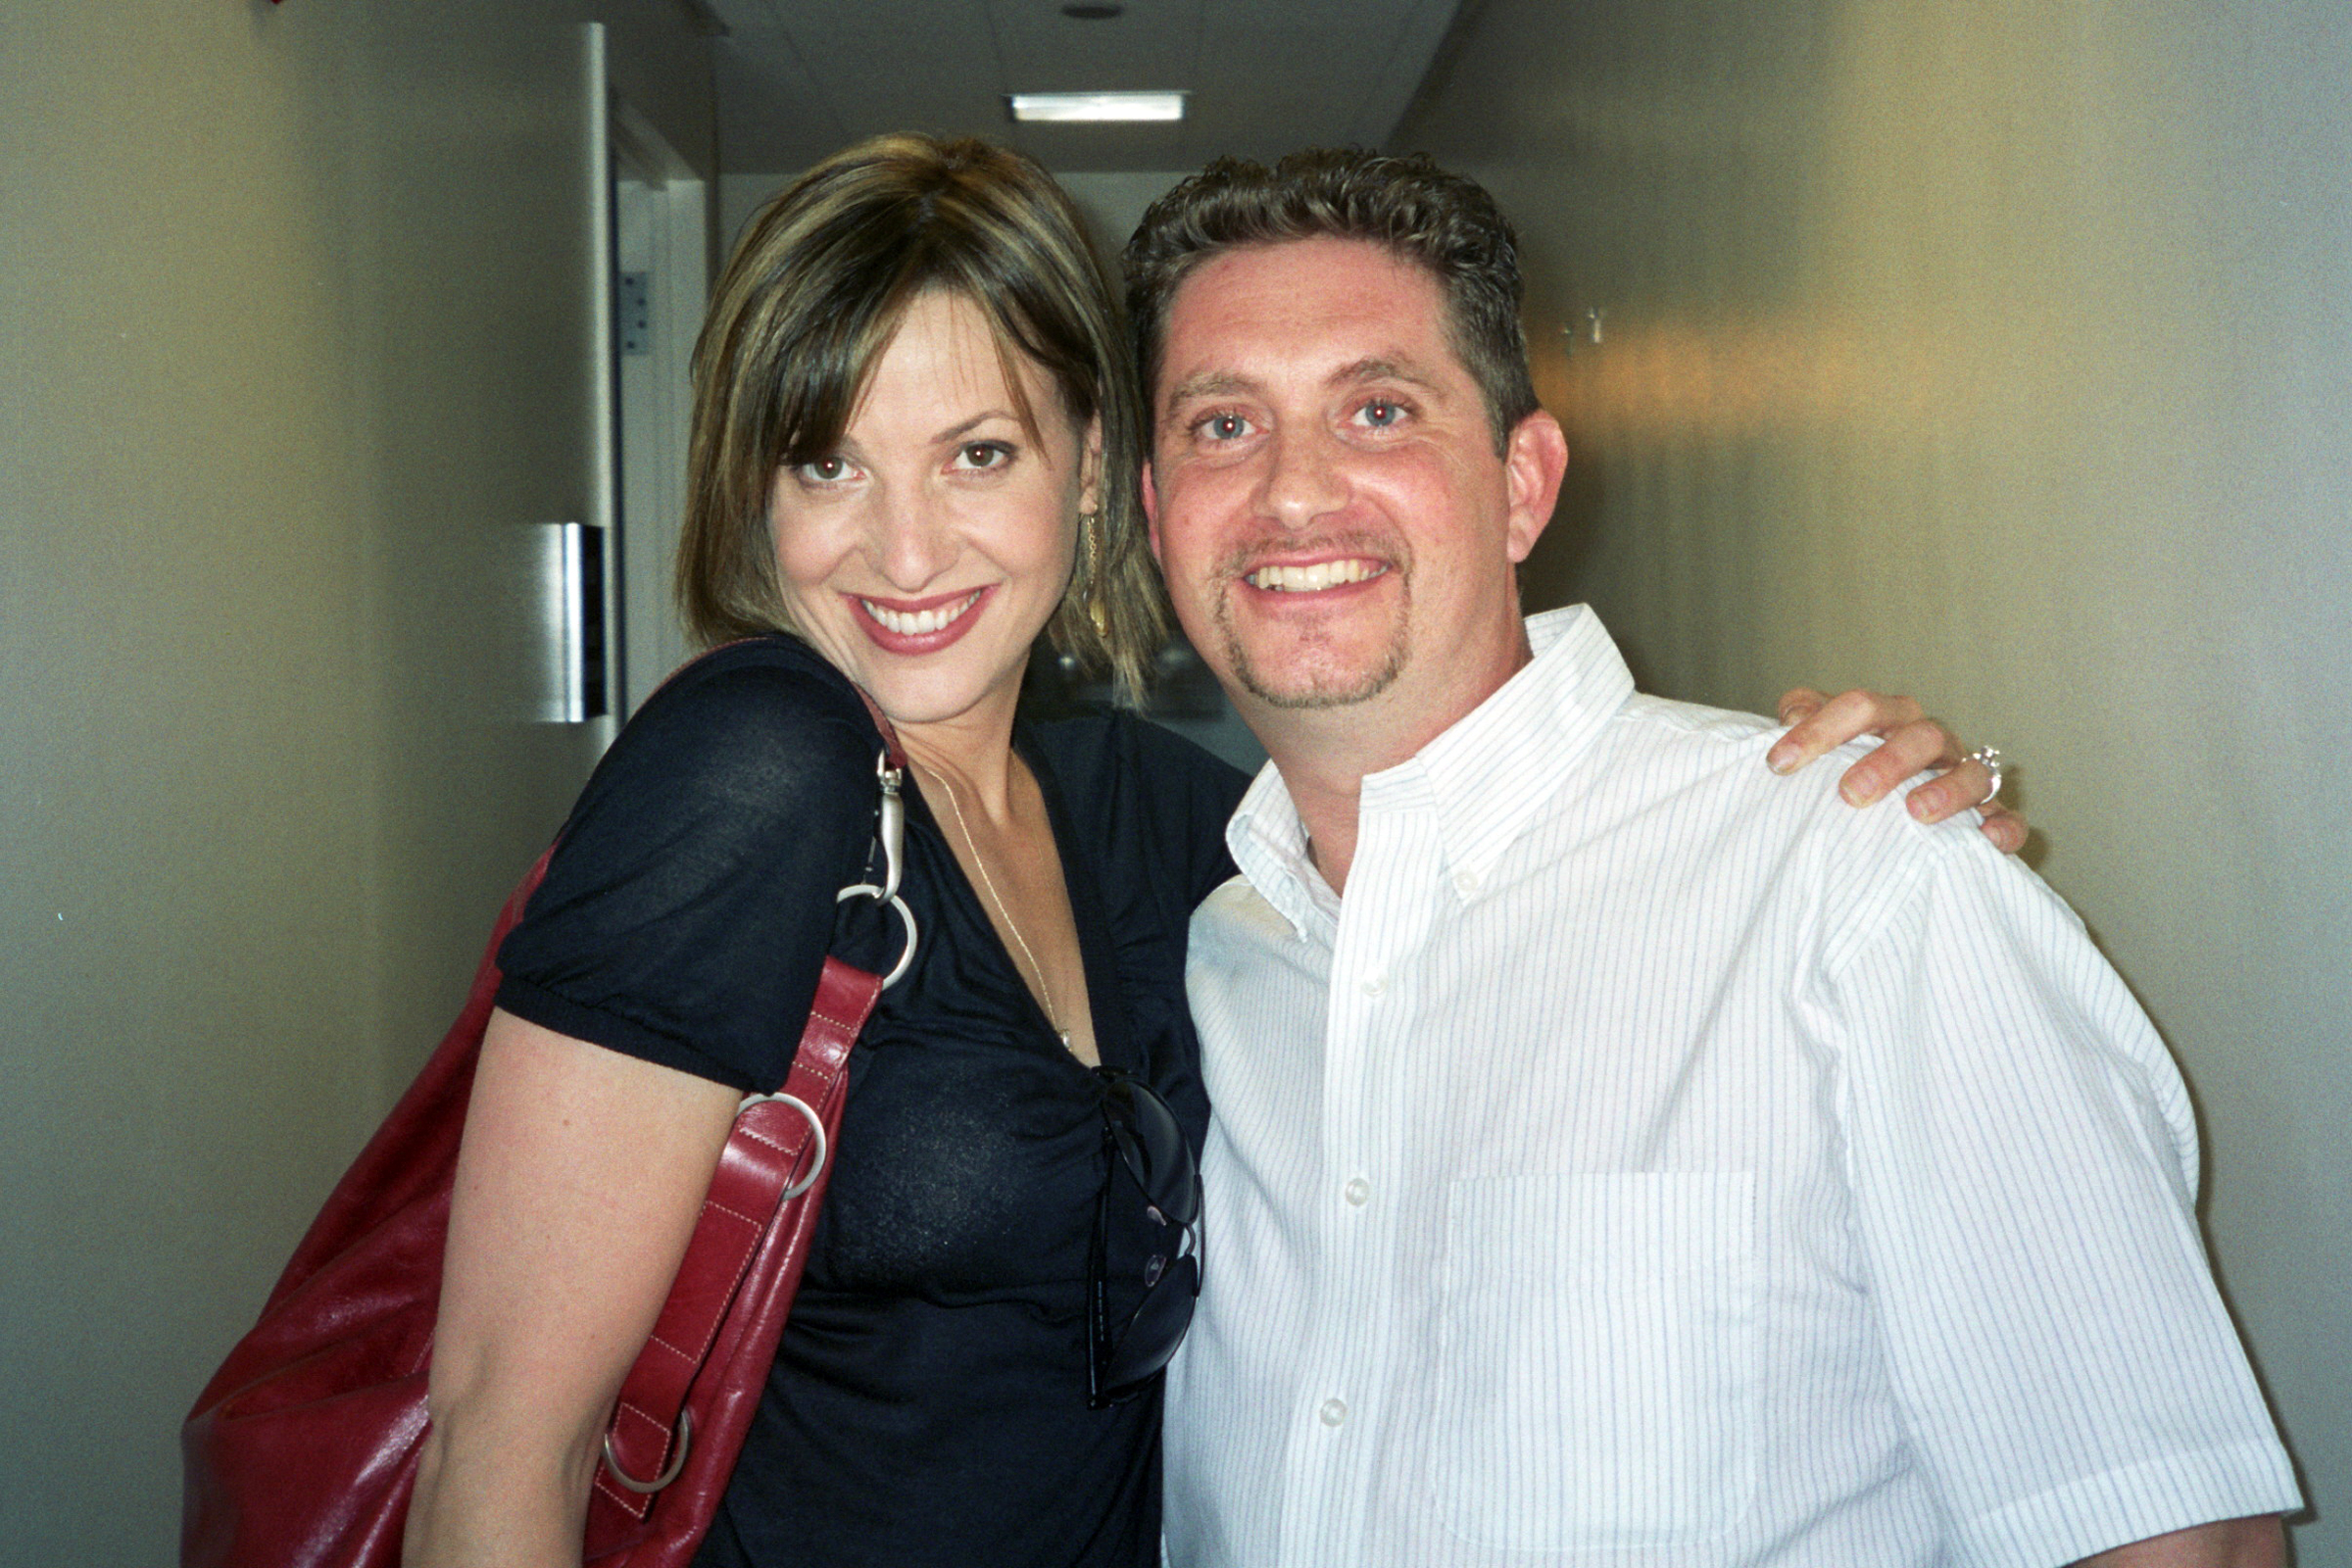 Comedian Bonnie Mcfarlane and actor Michael Christaldi in her dressing room at the Late Show with David Letterman.